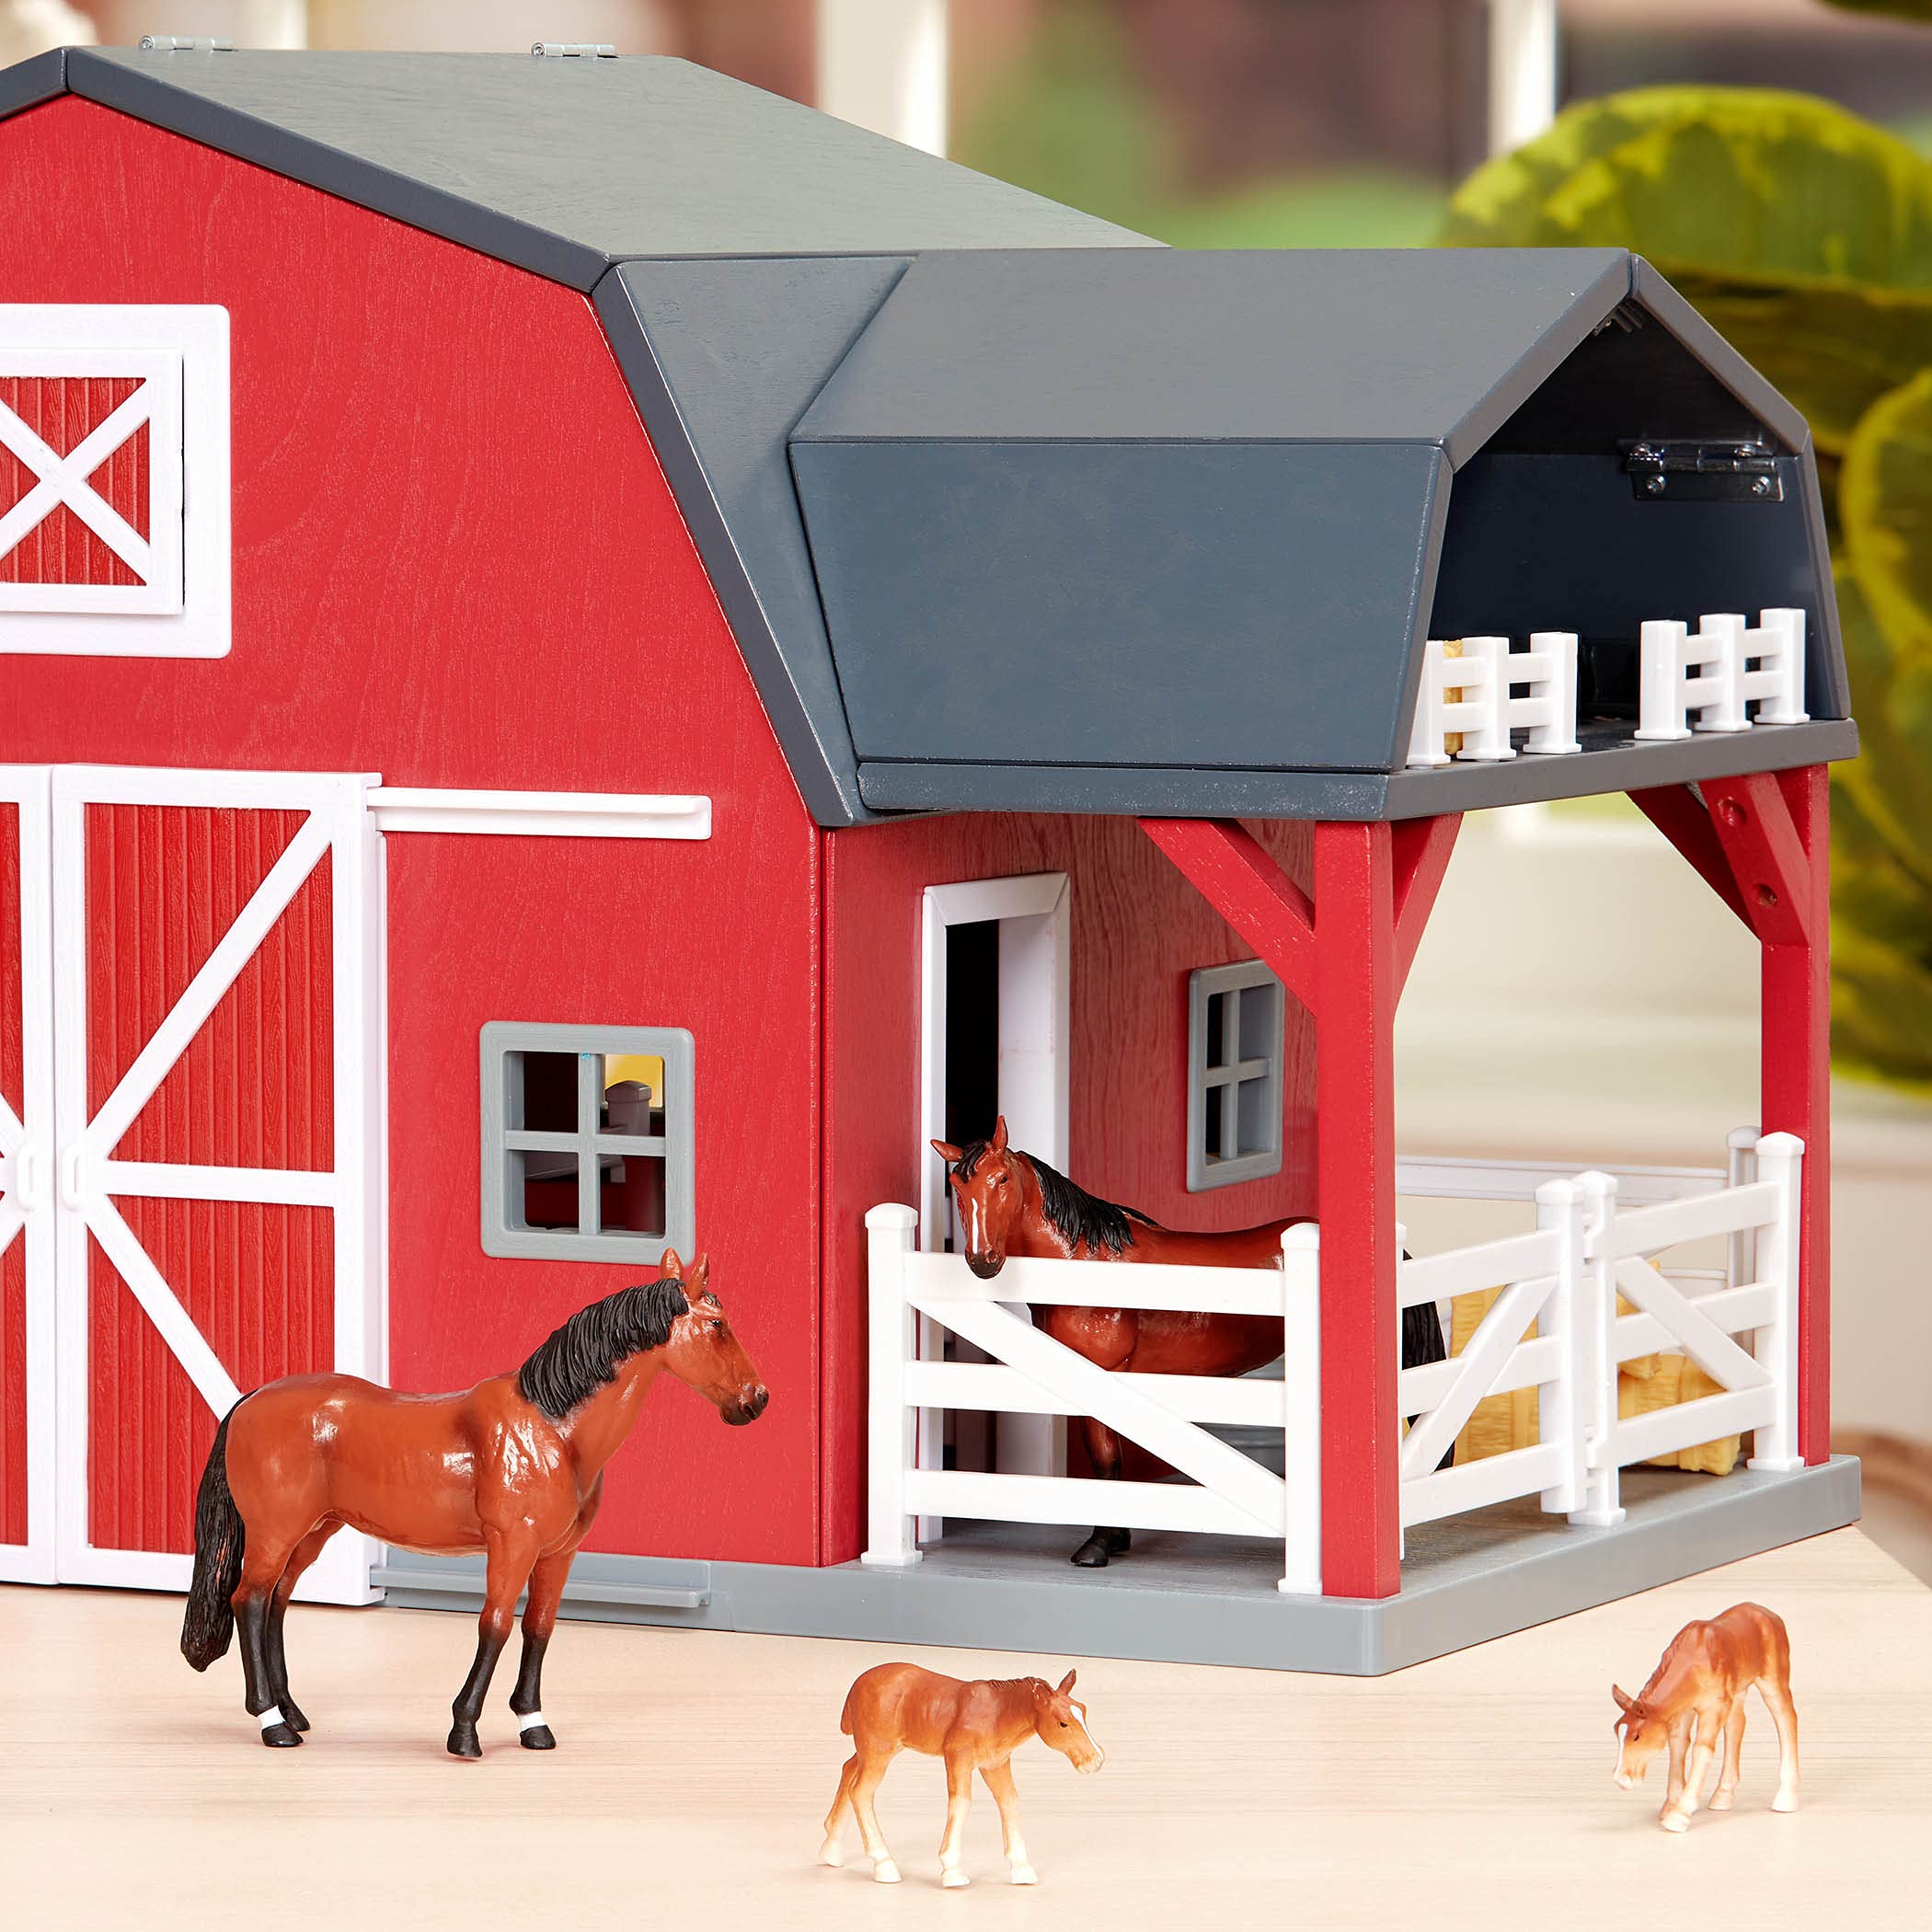 Terra by Battat - Quarter Horse Family - Miniature Toy Horse Family Figurines for Kids 3-Years-Old & Up (4 Pc)